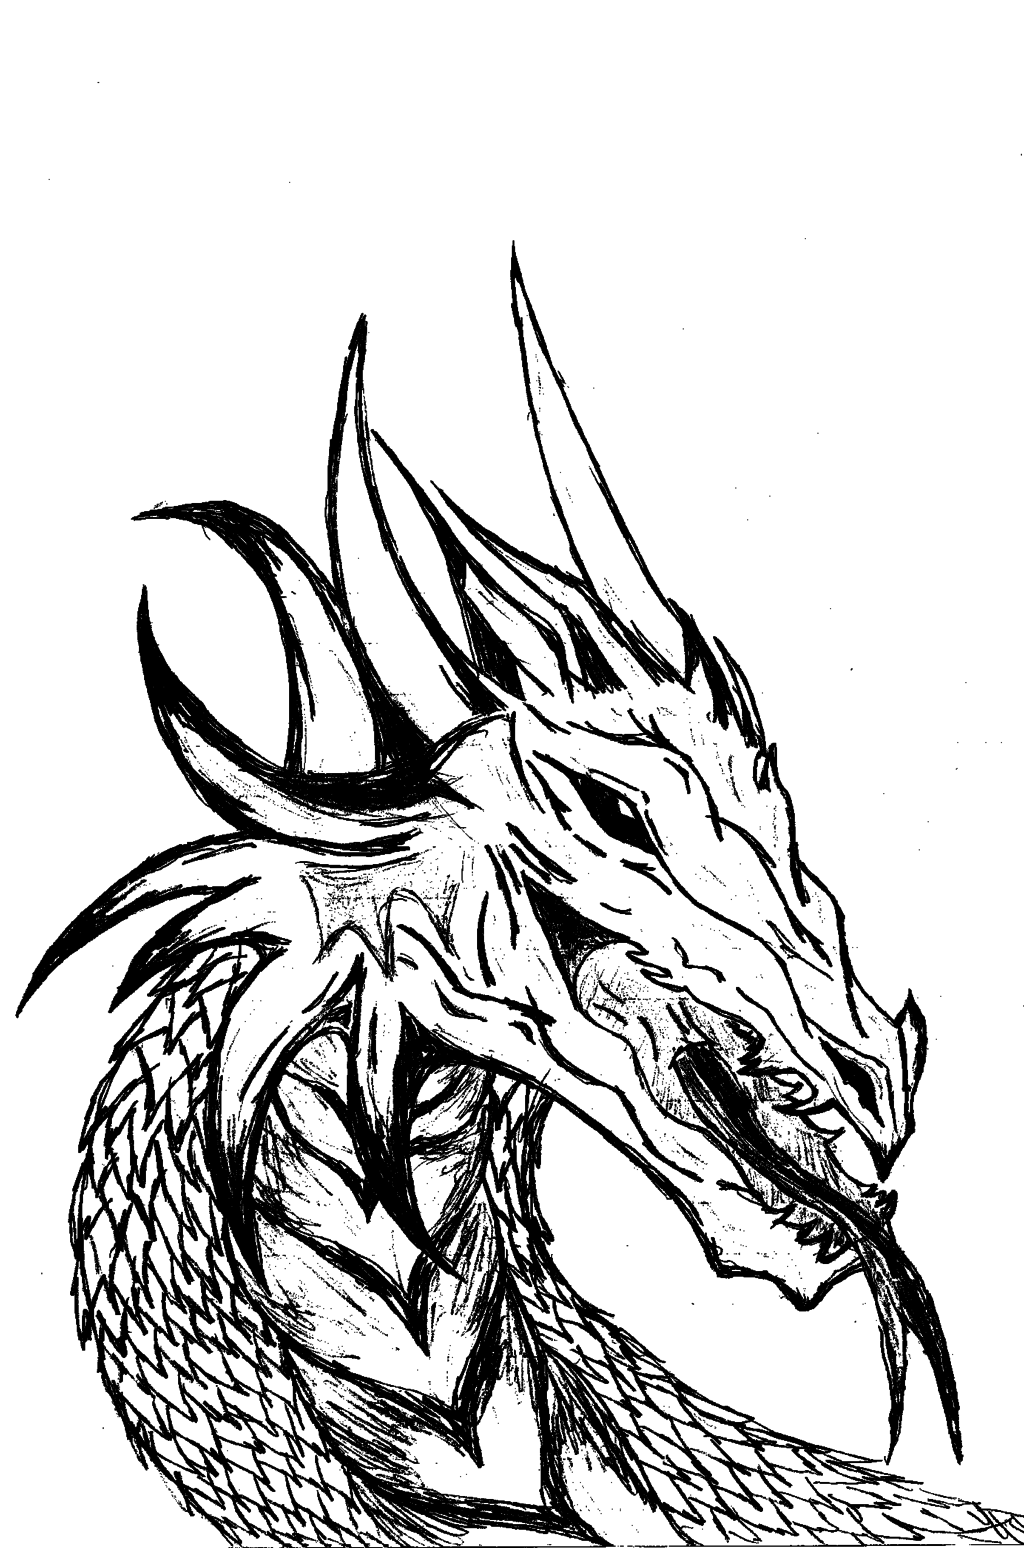 Dragon Head (black and white) by Bellep53 on Clipart library